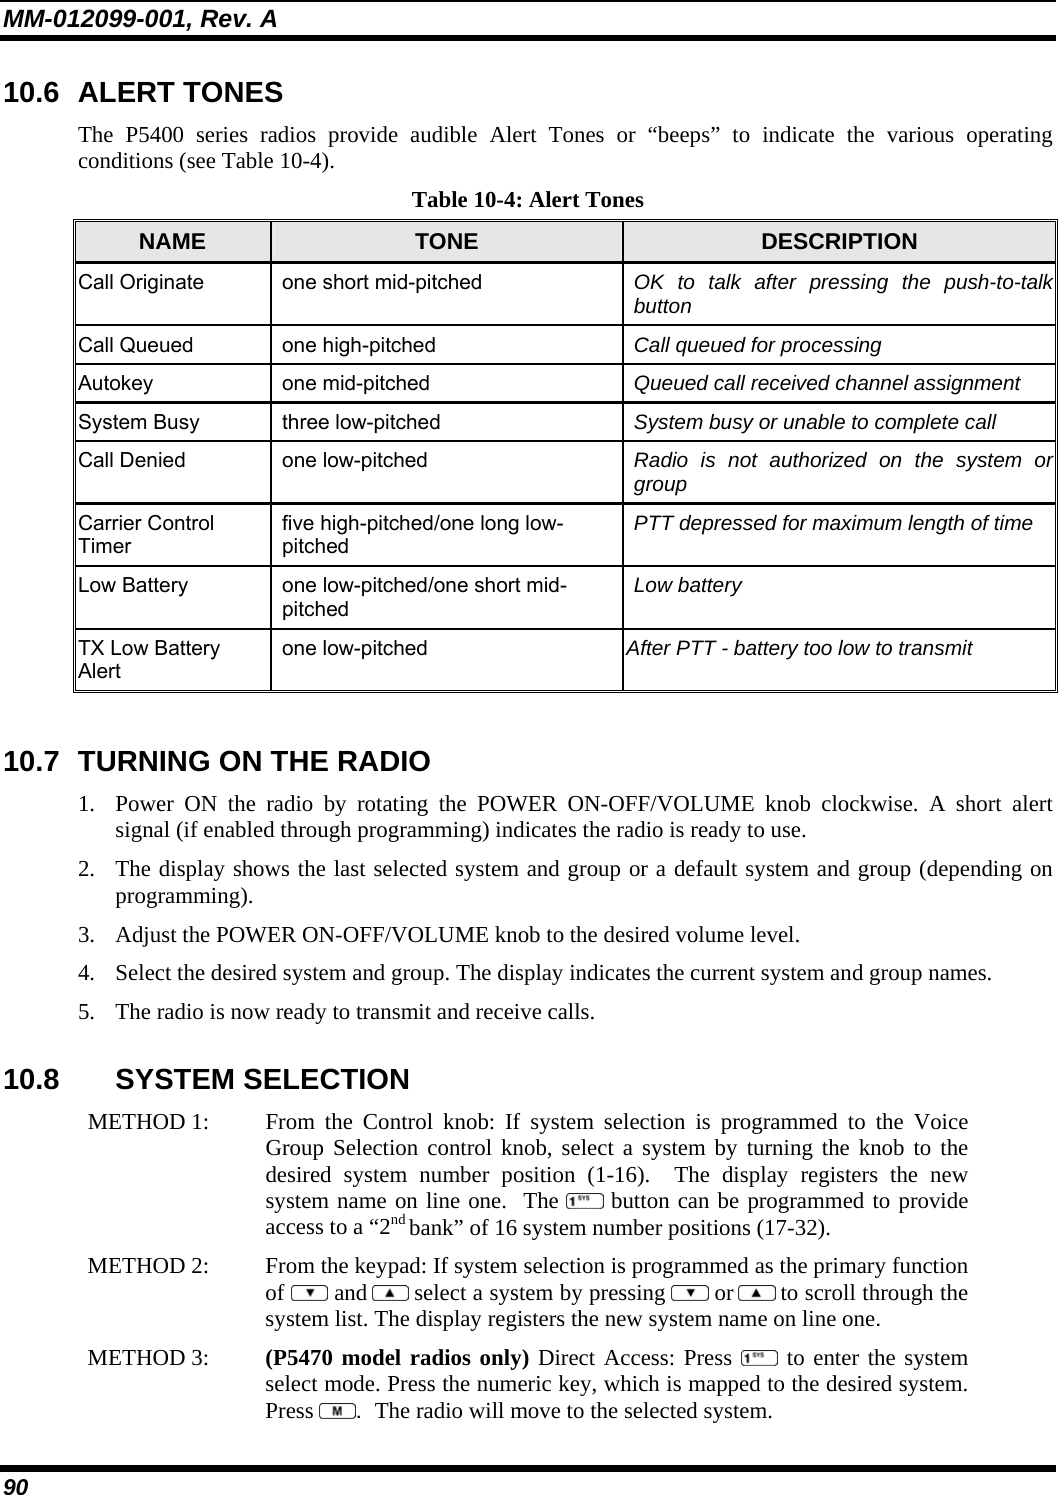 MM-012099-001, Rev. A 90 10.6 ALERT TONES The P5400 series radios provide audible Alert Tones or “beeps” to indicate the various operating conditions (see Table 10-4). Table 10-4: Alert Tones NAME  TONE  DESCRIPTION Call Originate  one short mid-pitched  OK to talk after pressing the push-to-talk button Call Queued  one high-pitched  Call queued for processing Autokey one mid-pitched  Queued call received channel assignment System Busy  three low-pitched  System busy or unable to complete call Call Denied  one low-pitched  Radio is not authorized on the system or group Carrier Control Timer five high-pitched/one long low-pitched PTT depressed for maximum length of time Low Battery  one low-pitched/one short mid-pitched Low battery TX Low Battery Alert one low-pitched  After PTT - battery too low to transmit  10.7  TURNING ON THE RADIO 1. Power ON the radio by rotating the POWER ON-OFF/VOLUME knob clockwise. A short alert signal (if enabled through programming) indicates the radio is ready to use.  2. The display shows the last selected system and group or a default system and group (depending on programming).  3. Adjust the POWER ON-OFF/VOLUME knob to the desired volume level.  4. Select the desired system and group. The display indicates the current system and group names.  5. The radio is now ready to transmit and receive calls. 10.8 SYSTEM SELECTION METHOD 1:   From the Control knob: If system selection is programmed to the Voice Group Selection control knob, select a system by turning the knob to the desired system number position (1-16).  The display registers the new system name on line one.  The  button can be programmed to provide access to a “2nd bank” of 16 system number positions (17-32). METHOD 2:   From the keypad: If system selection is programmed as the primary functionof  and  select a system by pressing   or  to scroll through the system list. The display registers the new system name on line one.  METHOD 3:   (P5470 model radios only) Direct Access: Press  to enter the system select mode. Press the numeric key, which is mapped to the desired system.Press  .  The radio will move to the selected system.  